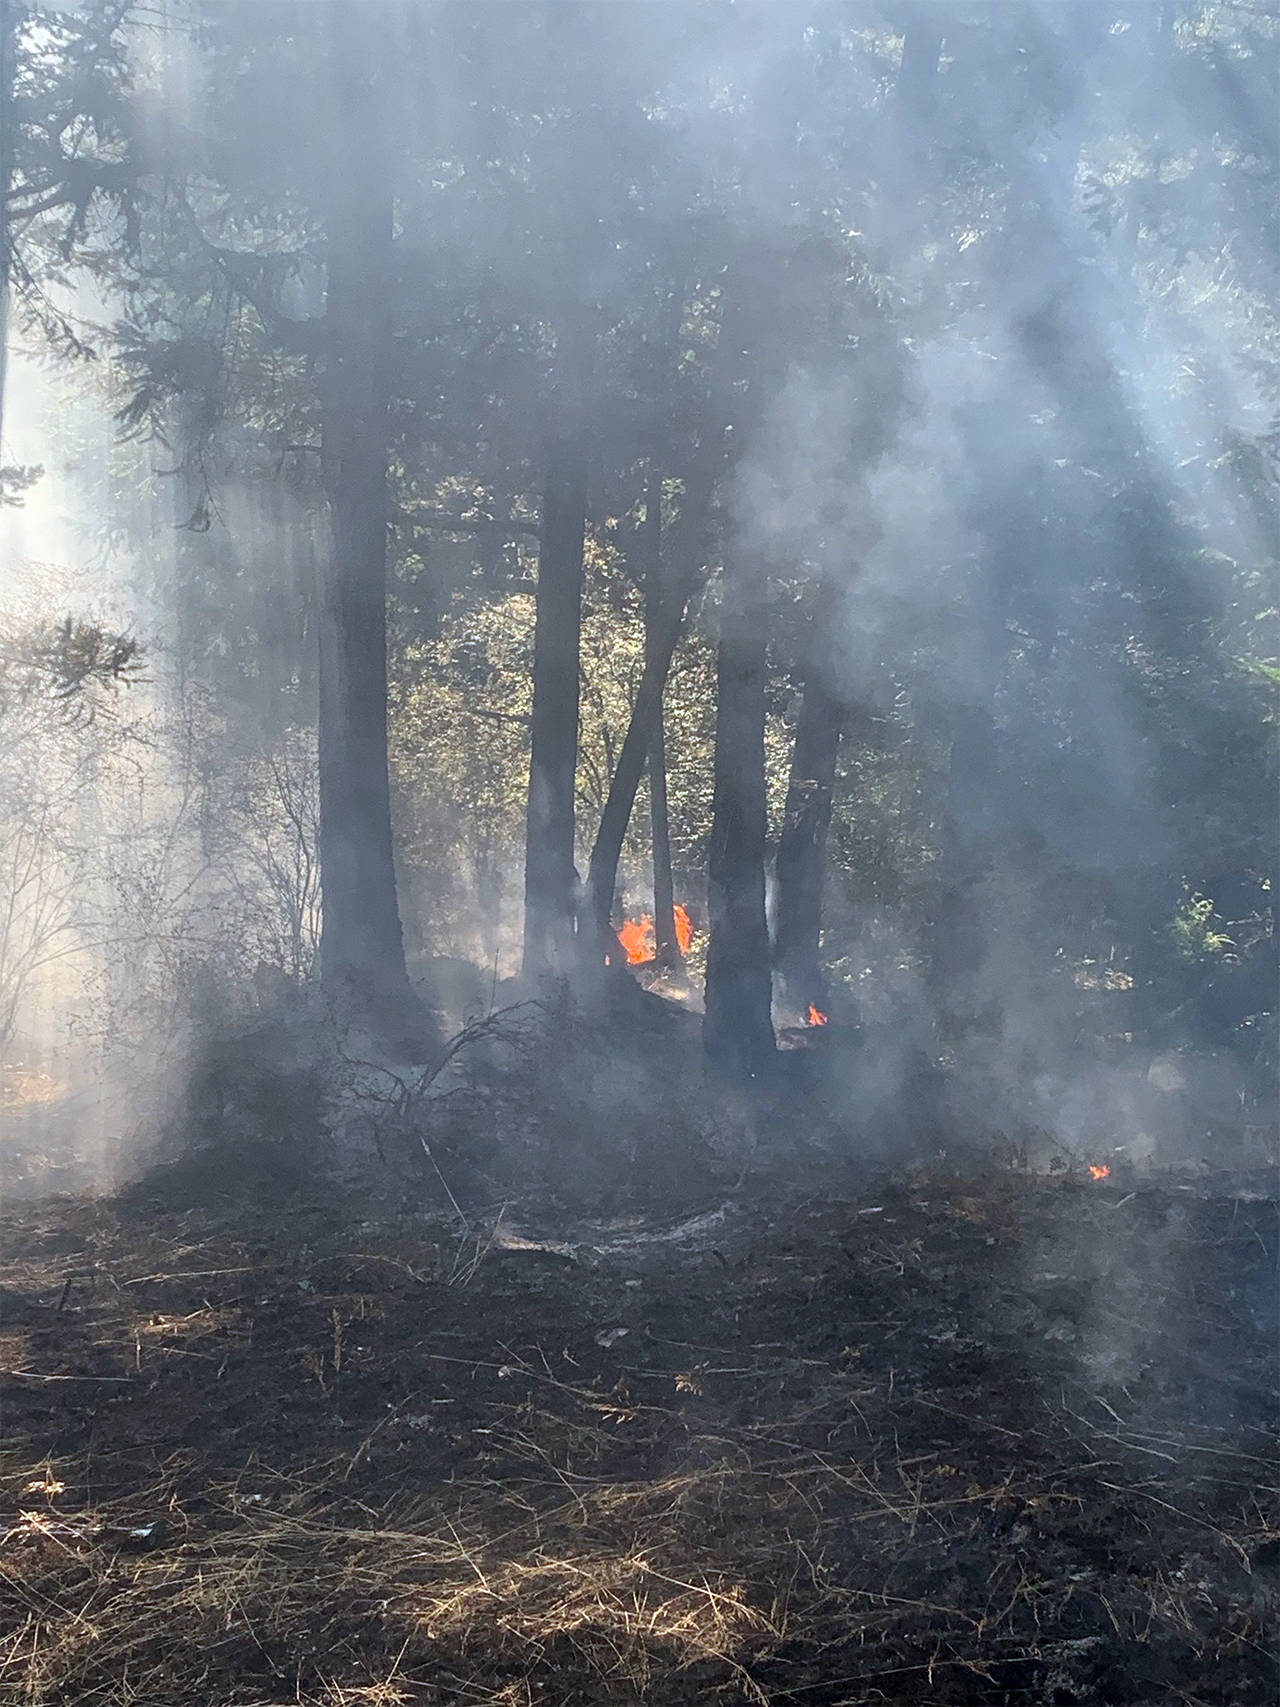 Orcas, Lopez and San Juan Fire team up with DNR for wildfire